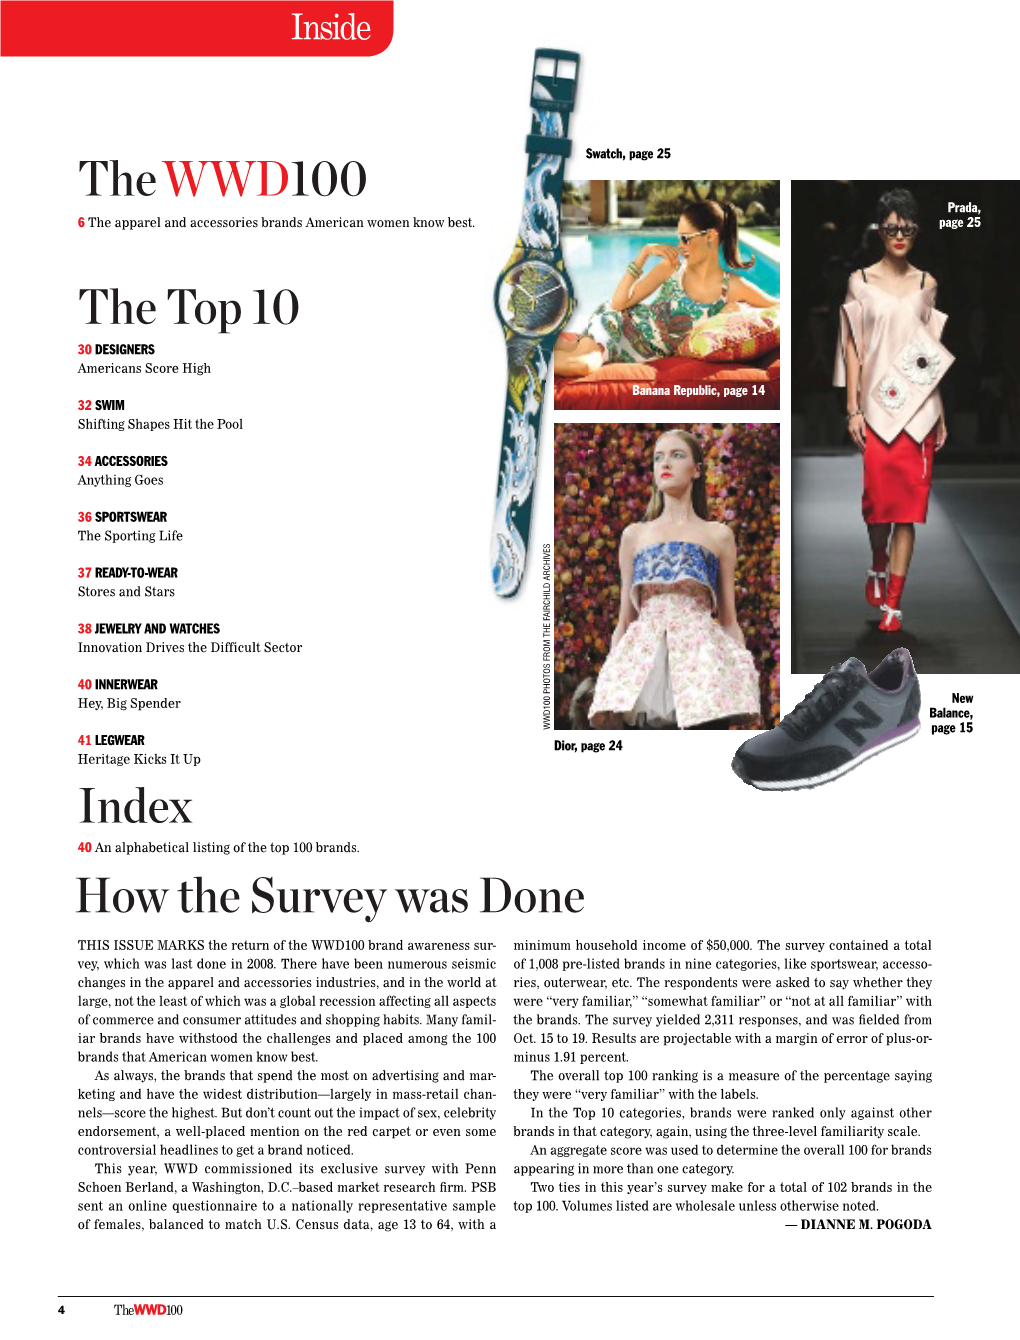 The WWD100 the Top 10 Index How the Survey Was Done